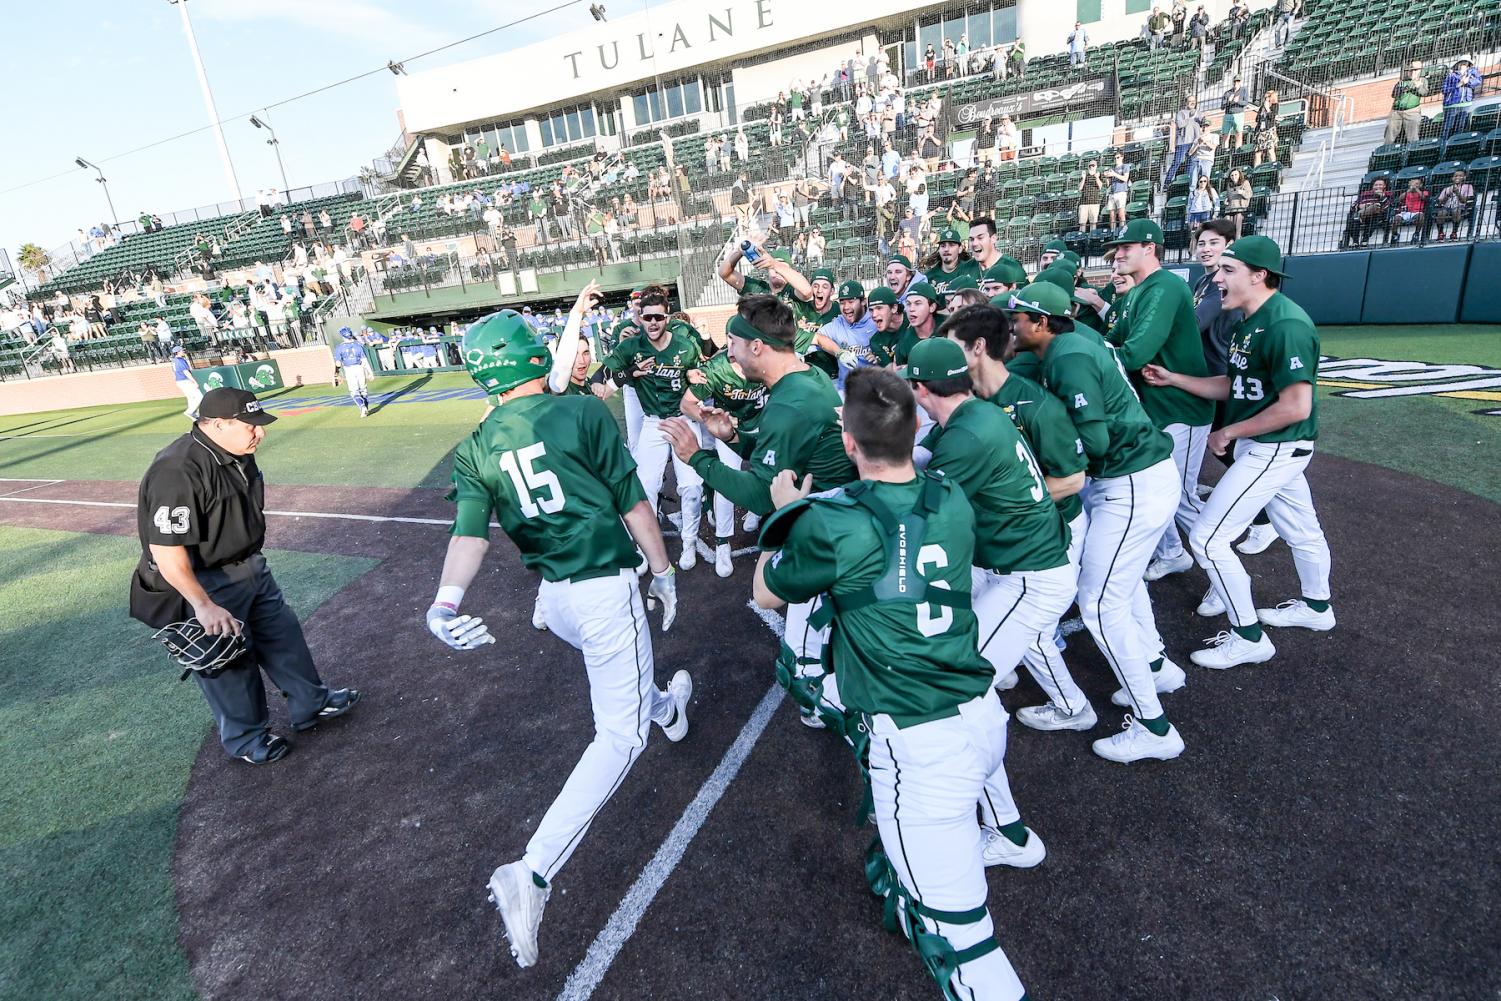 Tulane baseball climbing the rankings early in 2020 campaign